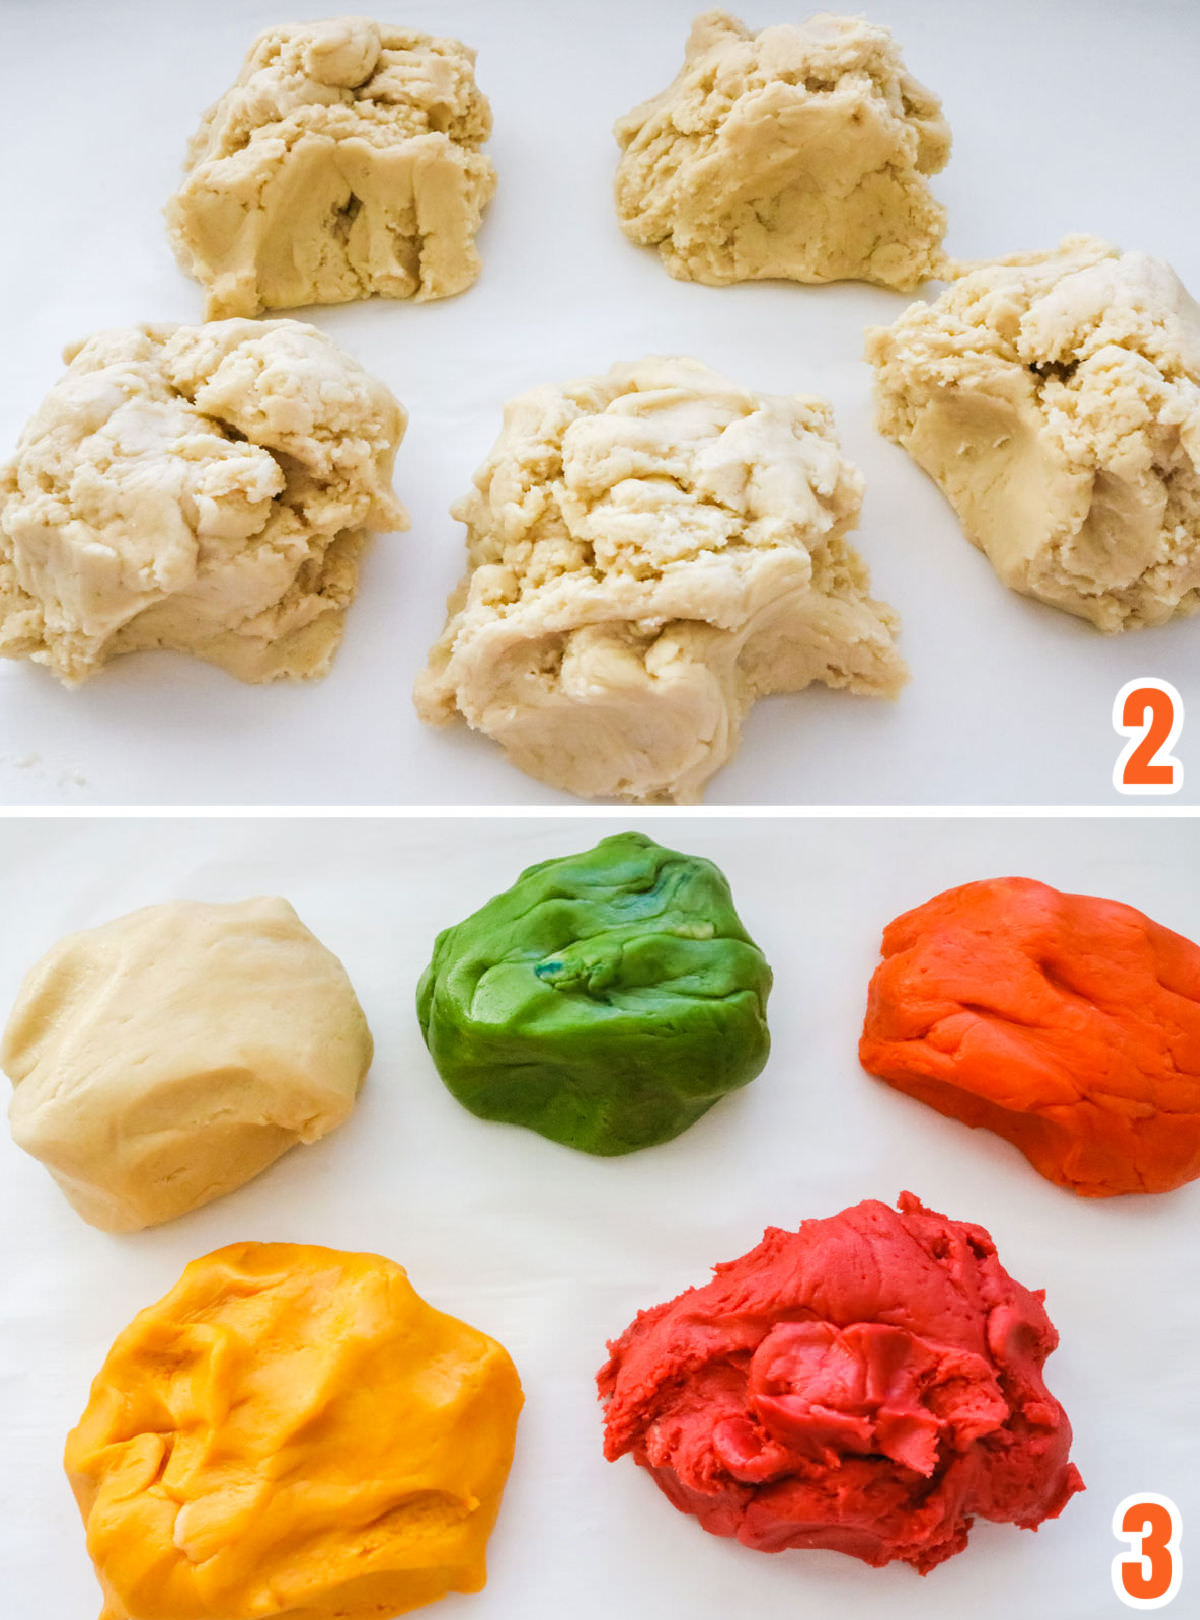 Collage image showing the steps for coloring the Sugar Cookie Bar dough.